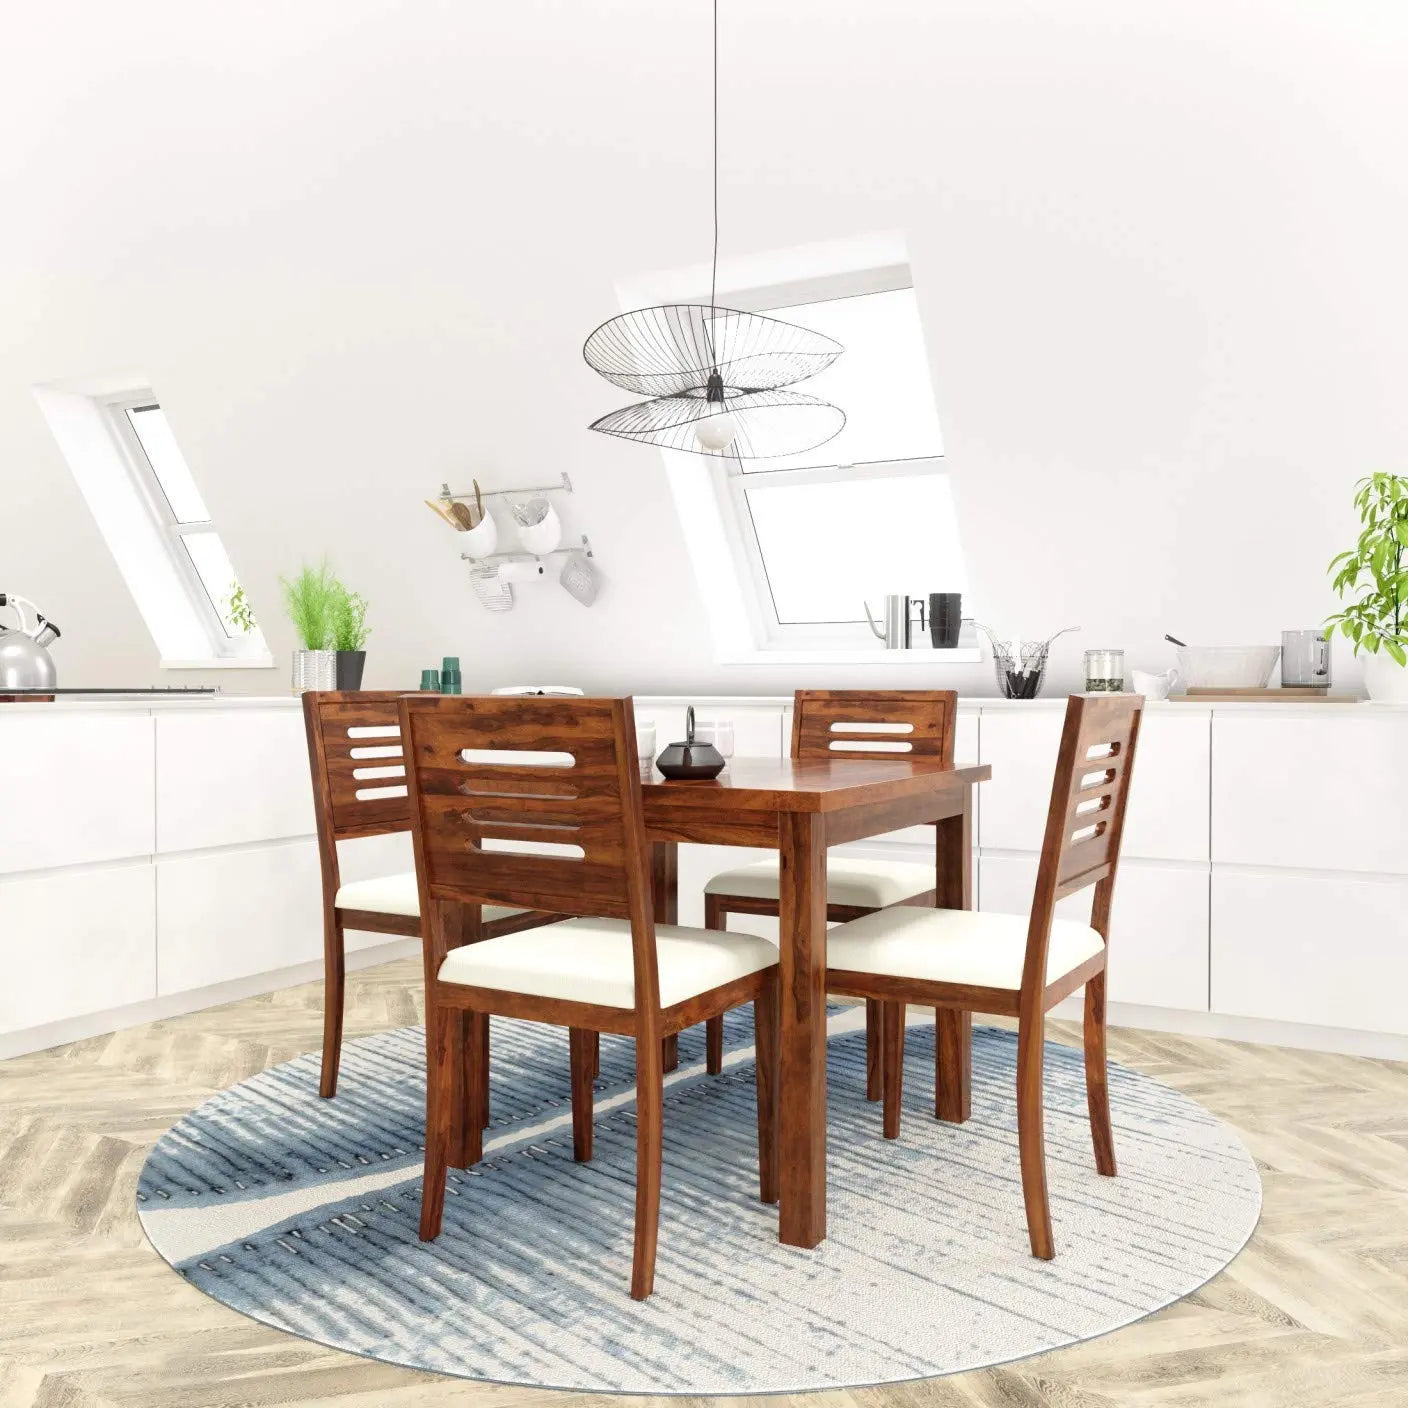 Dining Set Semi- Wooden Dining Table 4 Seater Four Seater Dinning Table with 4 Chairs for Home | Dining Room Sets for Restaurants | Sheesham Wood Furneez